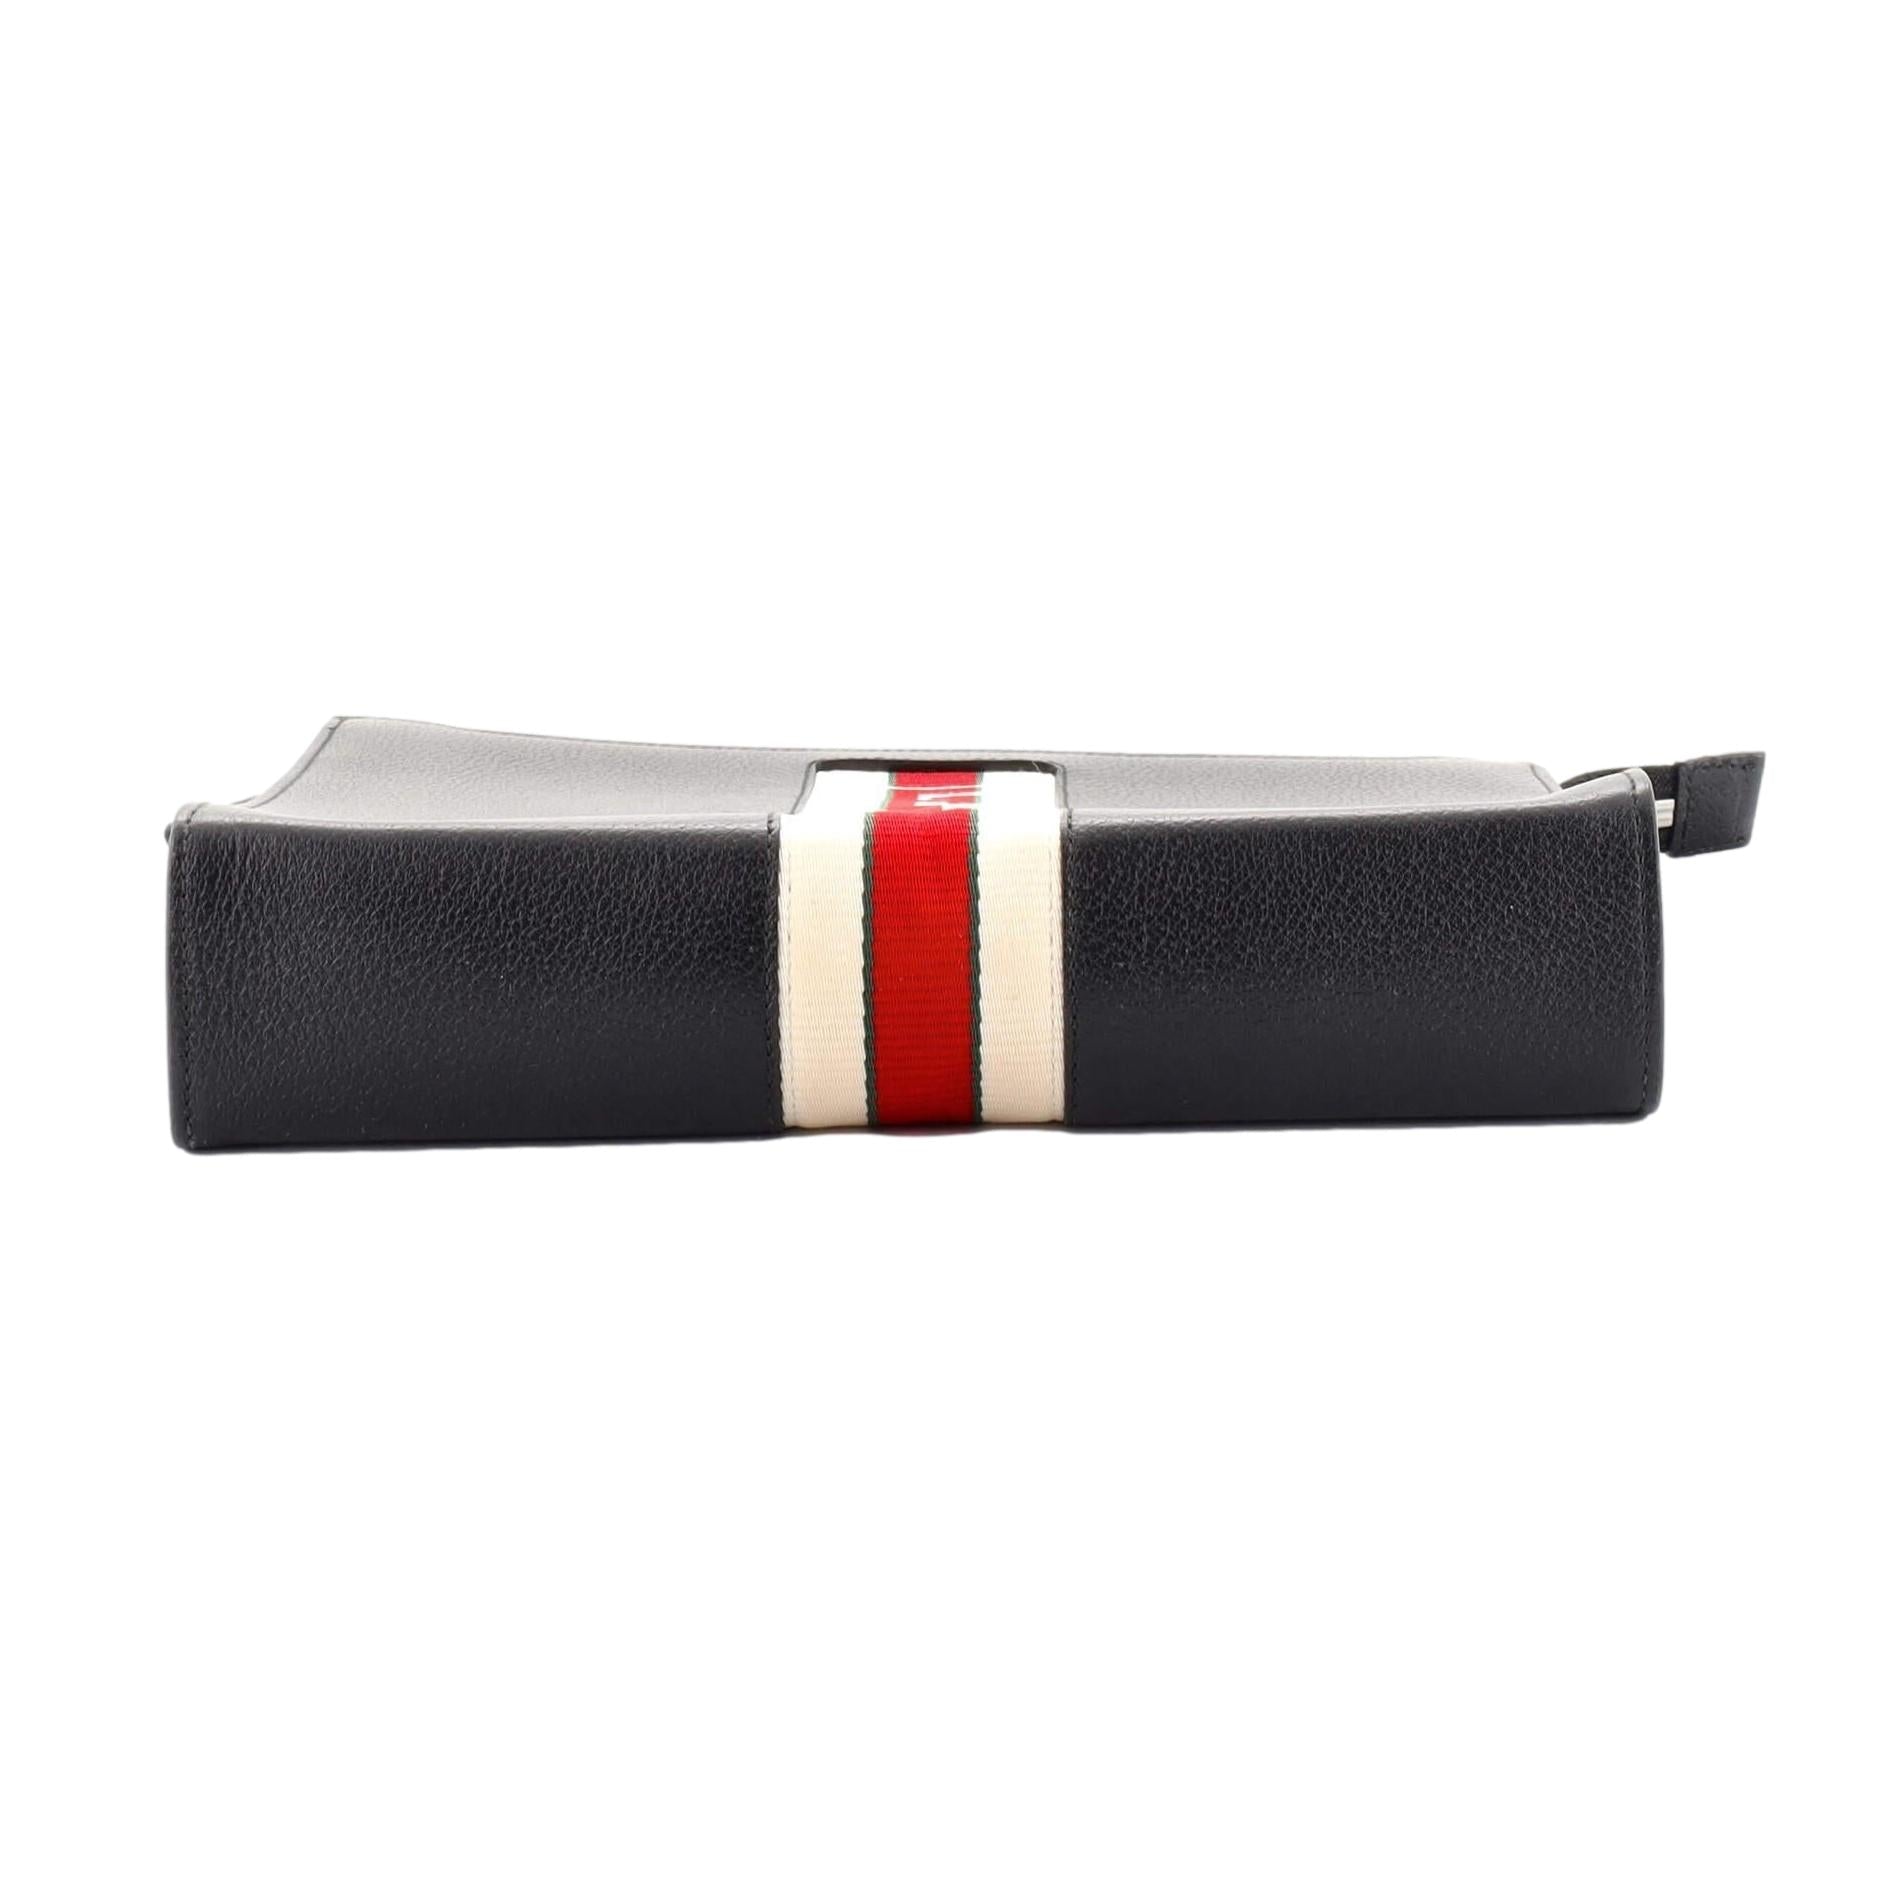 Gucci Sport Black Leather Cosmetic Case 475316 at_Queen_Bee_of_Beverly_Hills